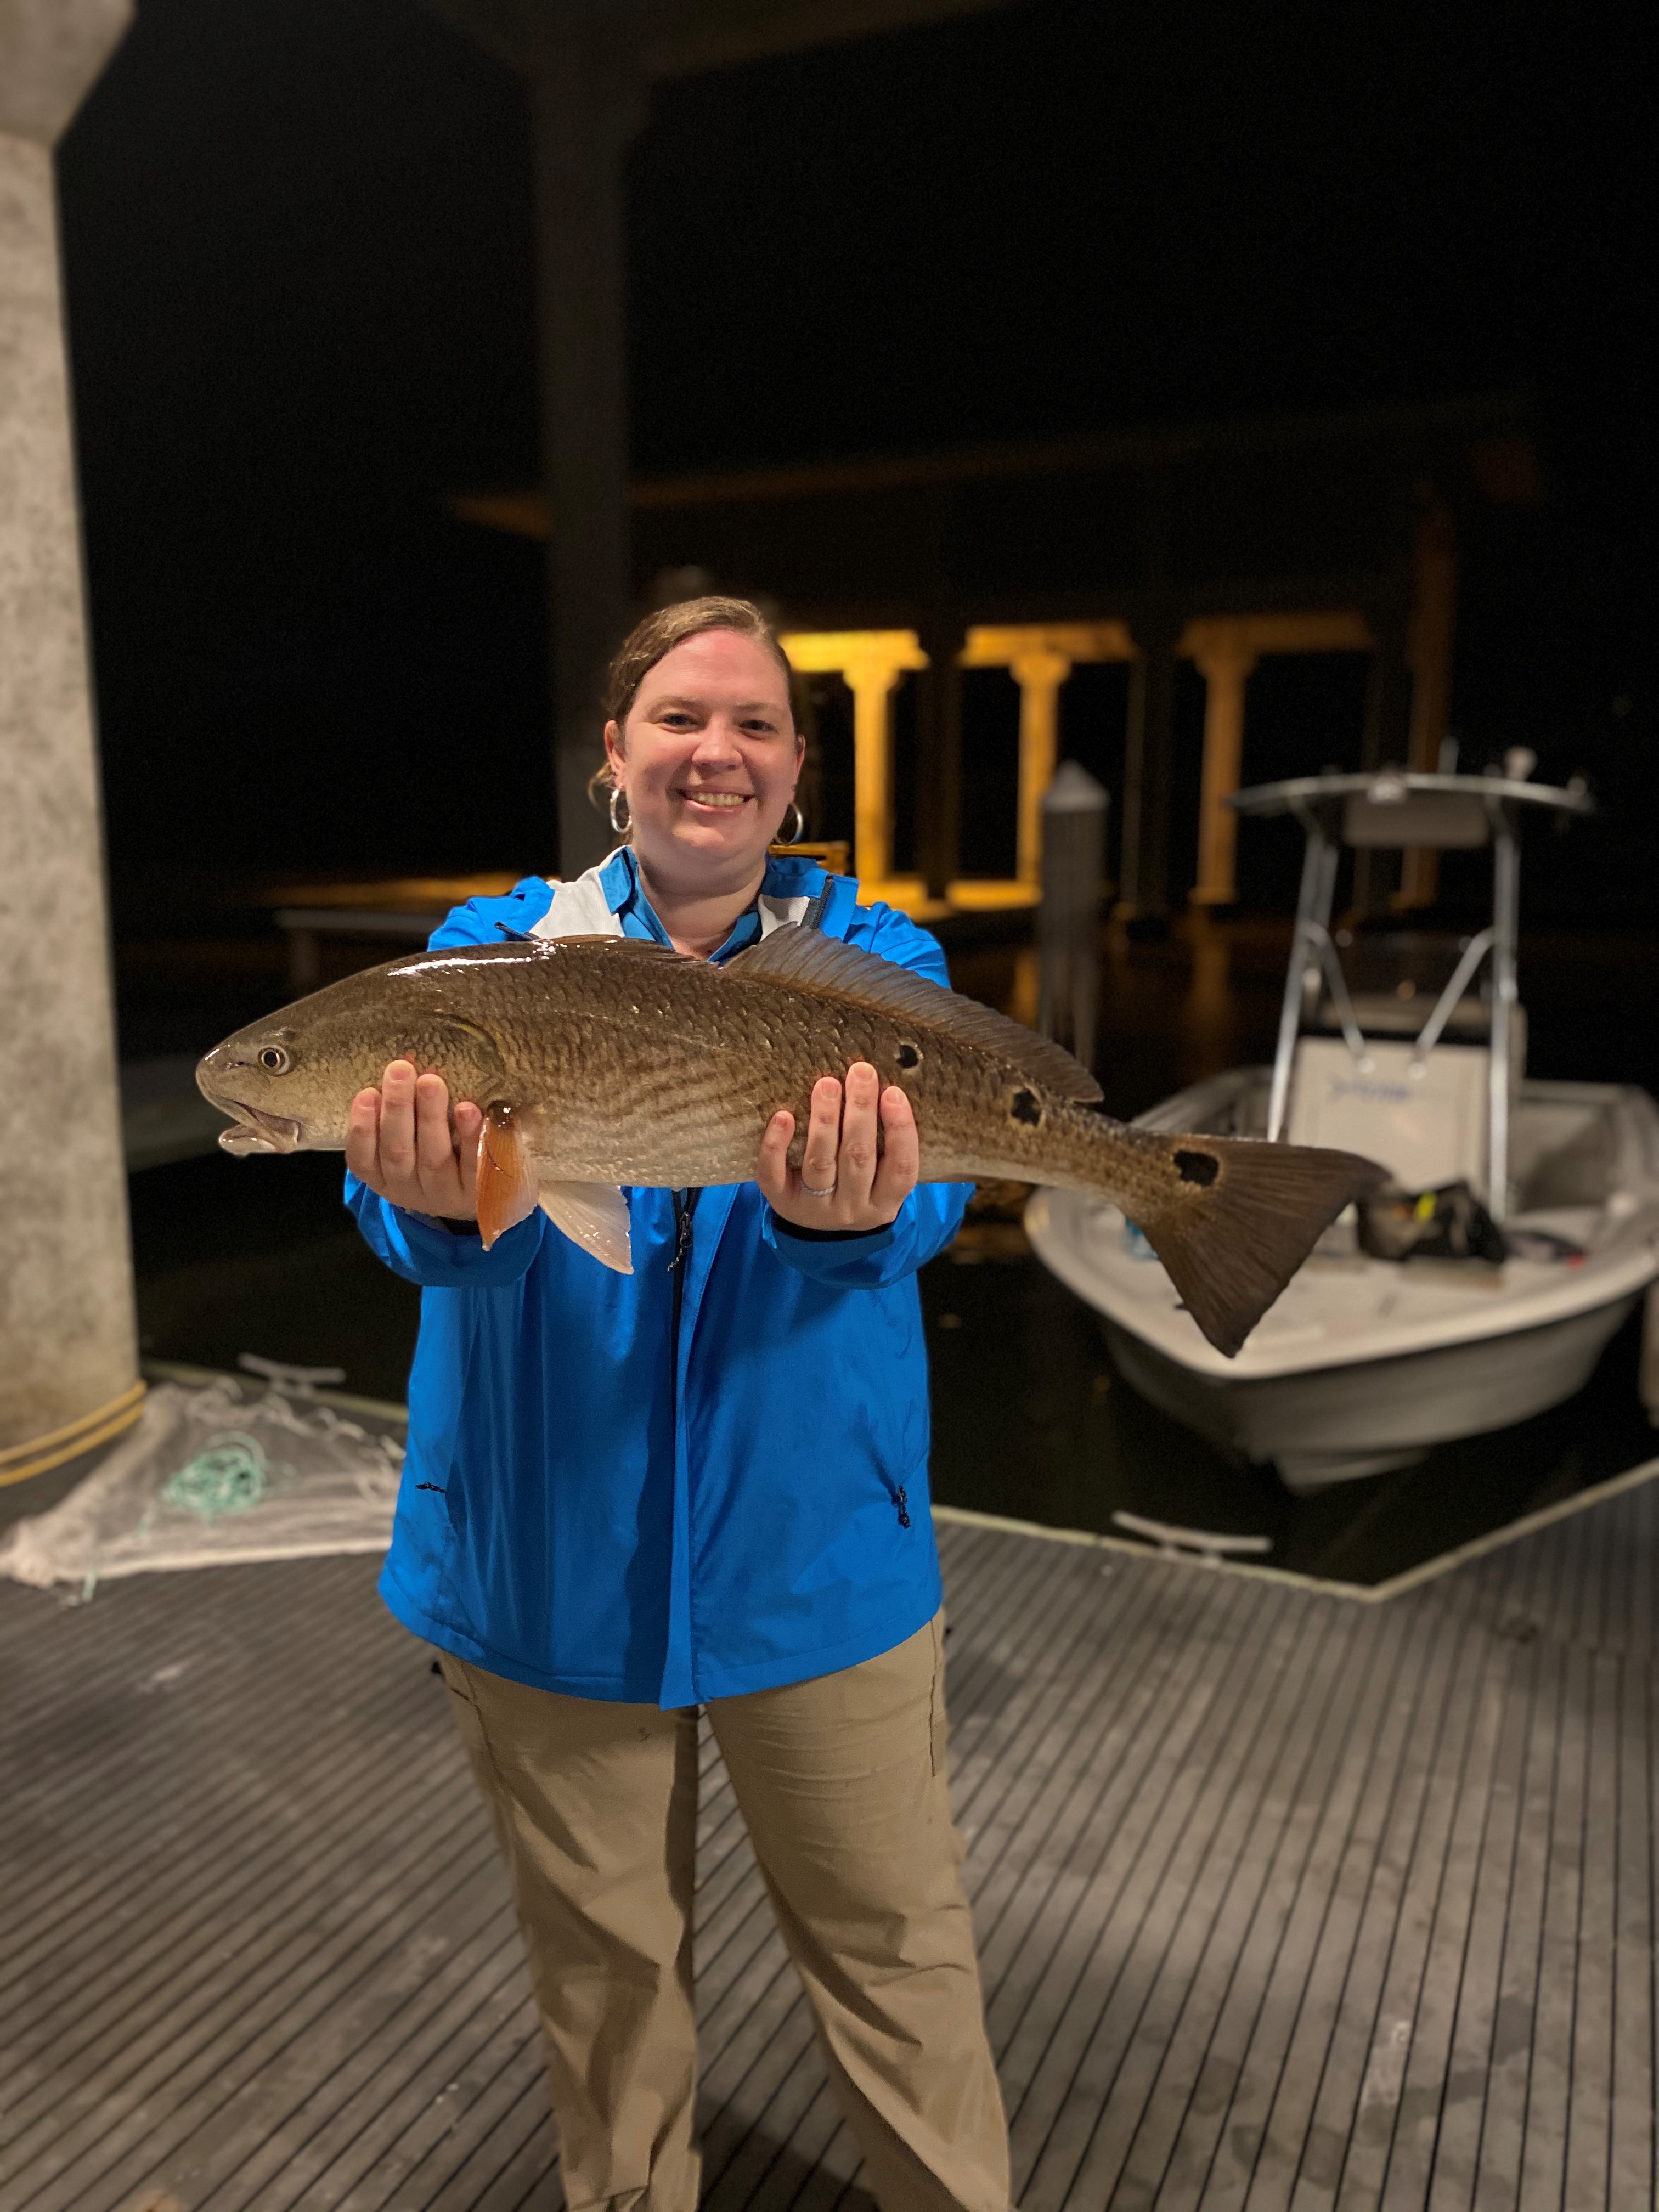 https://www.wlf.louisiana.gov/assets/Events_And_Education/Images/woman-holding-redfish.jpg